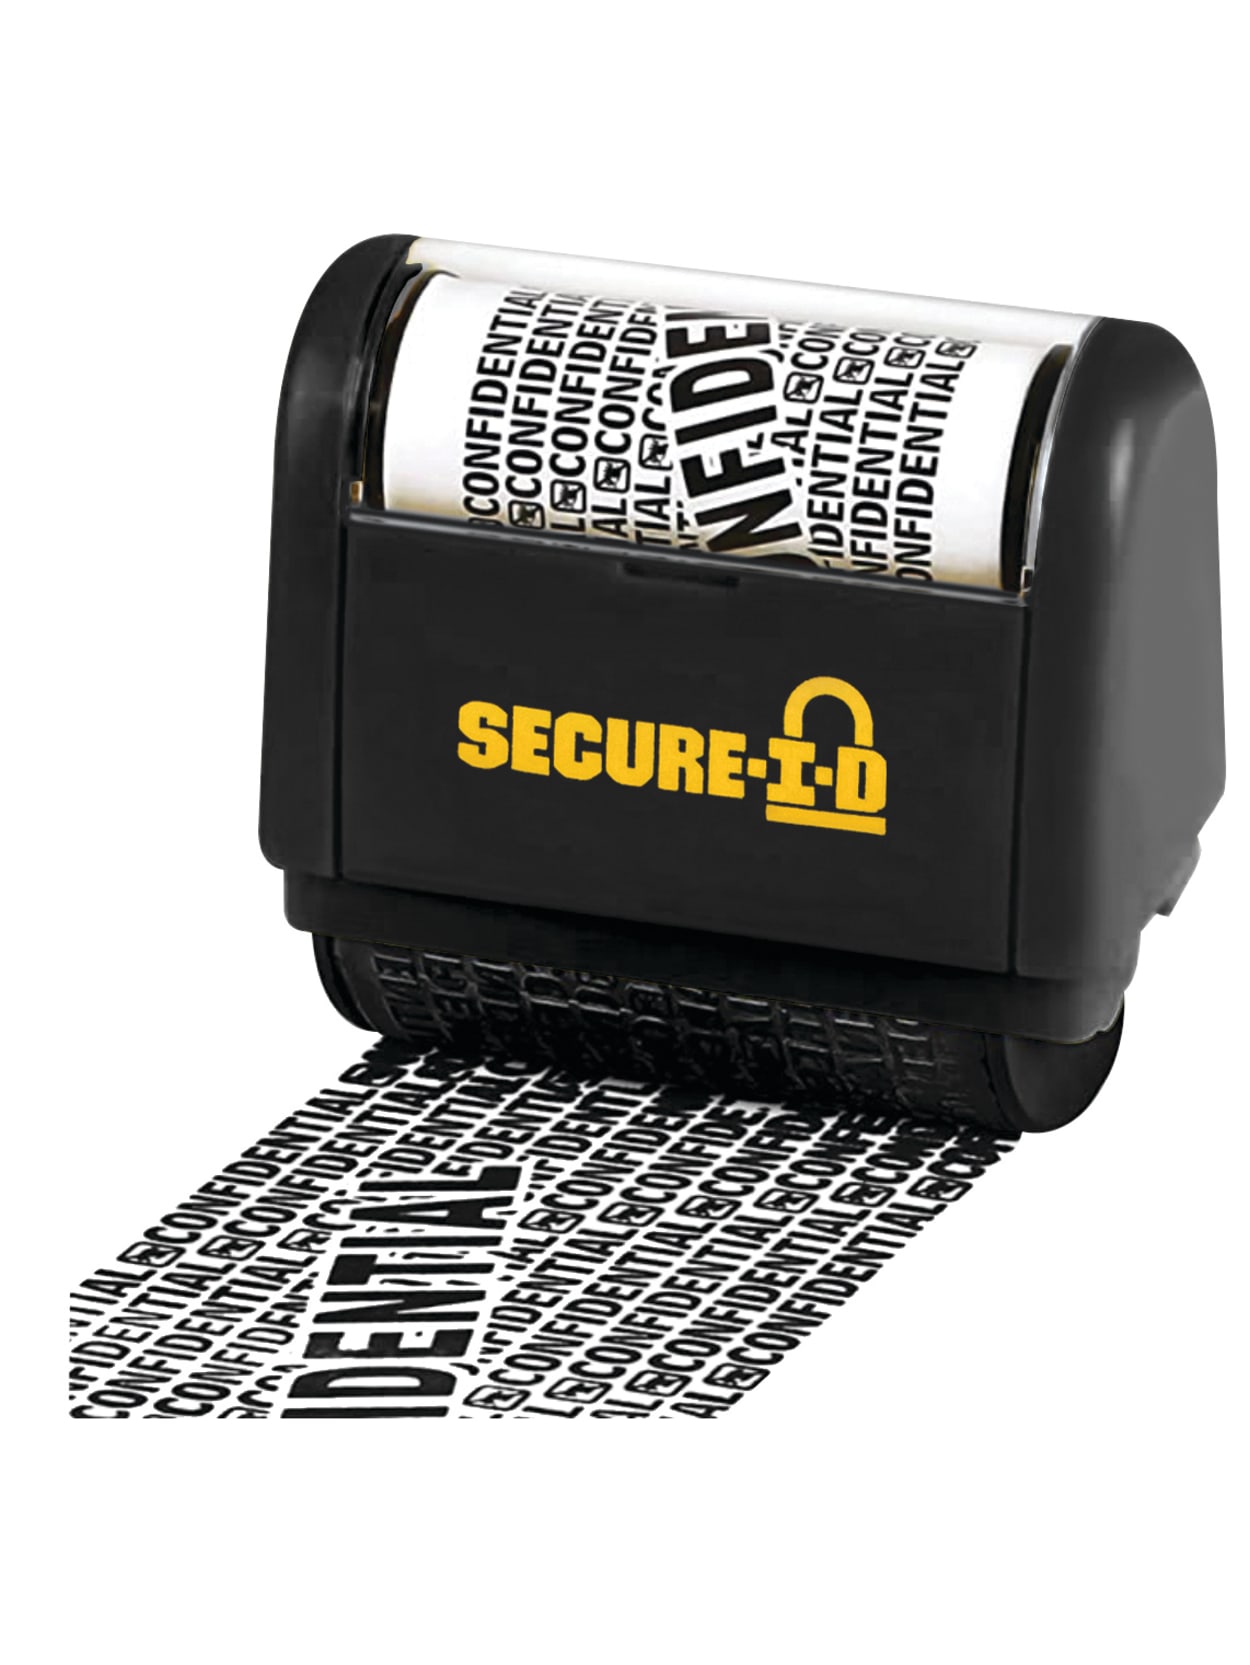 Identity Theft Prevention Security Stamp Roller Black Out Document Info Office